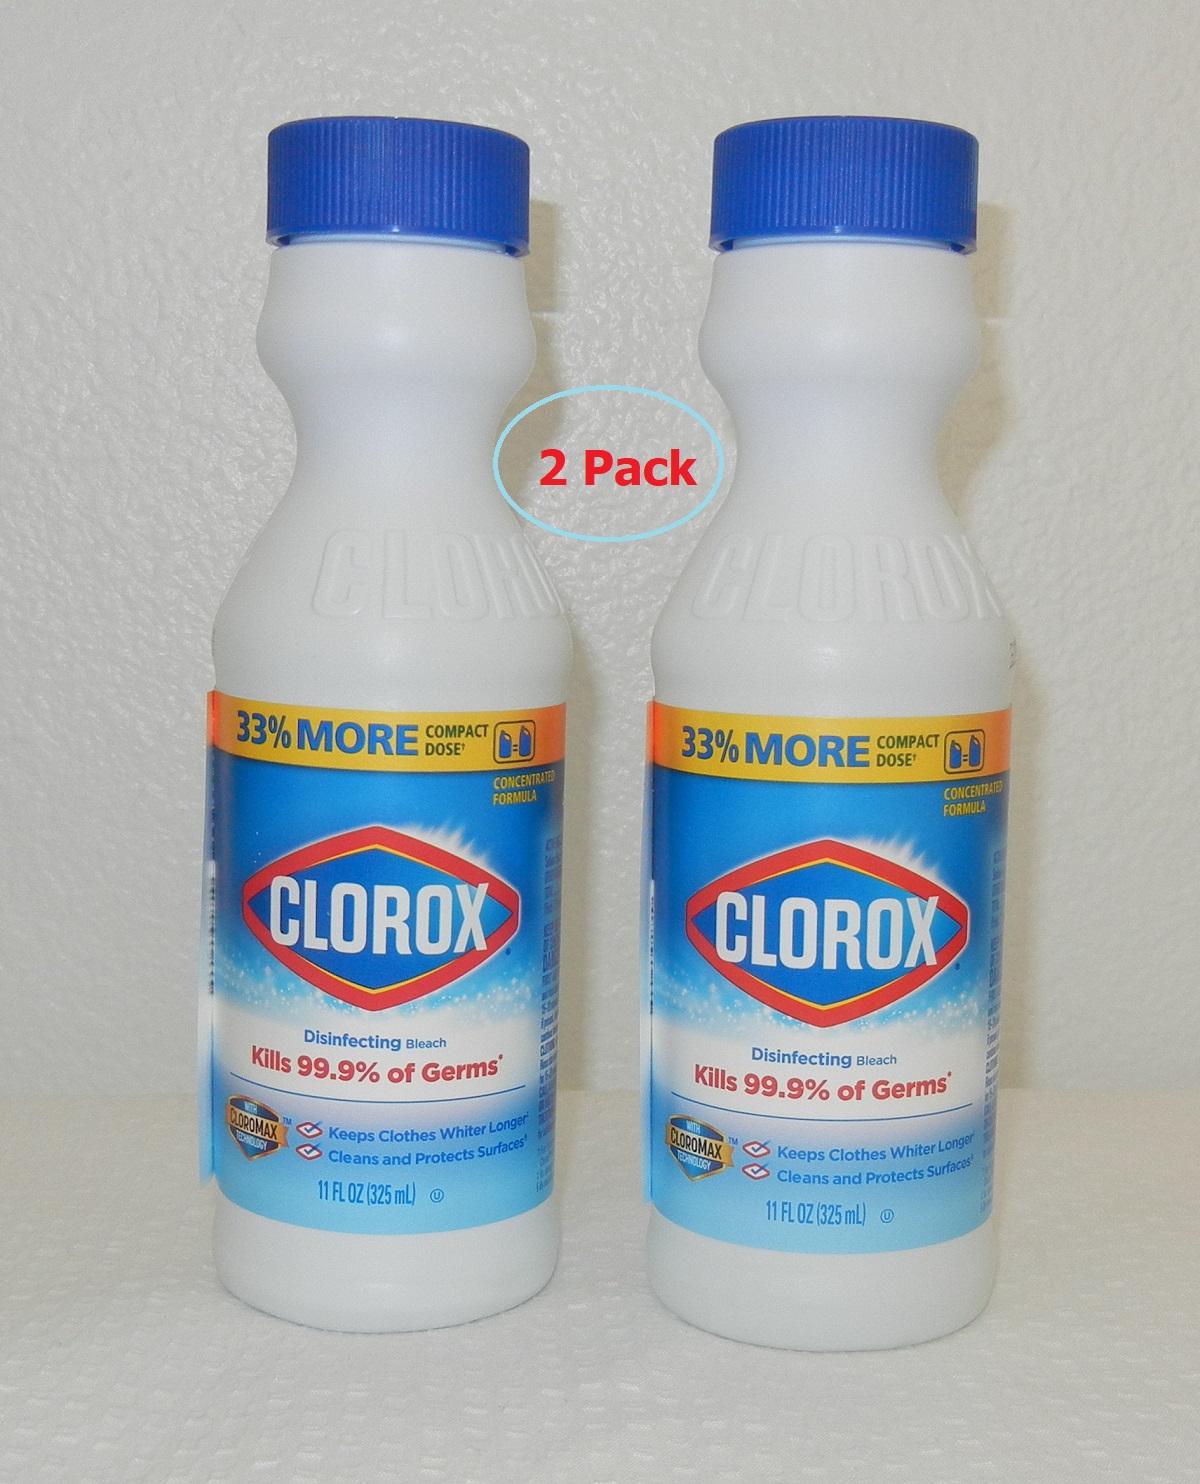 Clorox Disinfecting Bleach Original Concentrated Formula - dilute to use